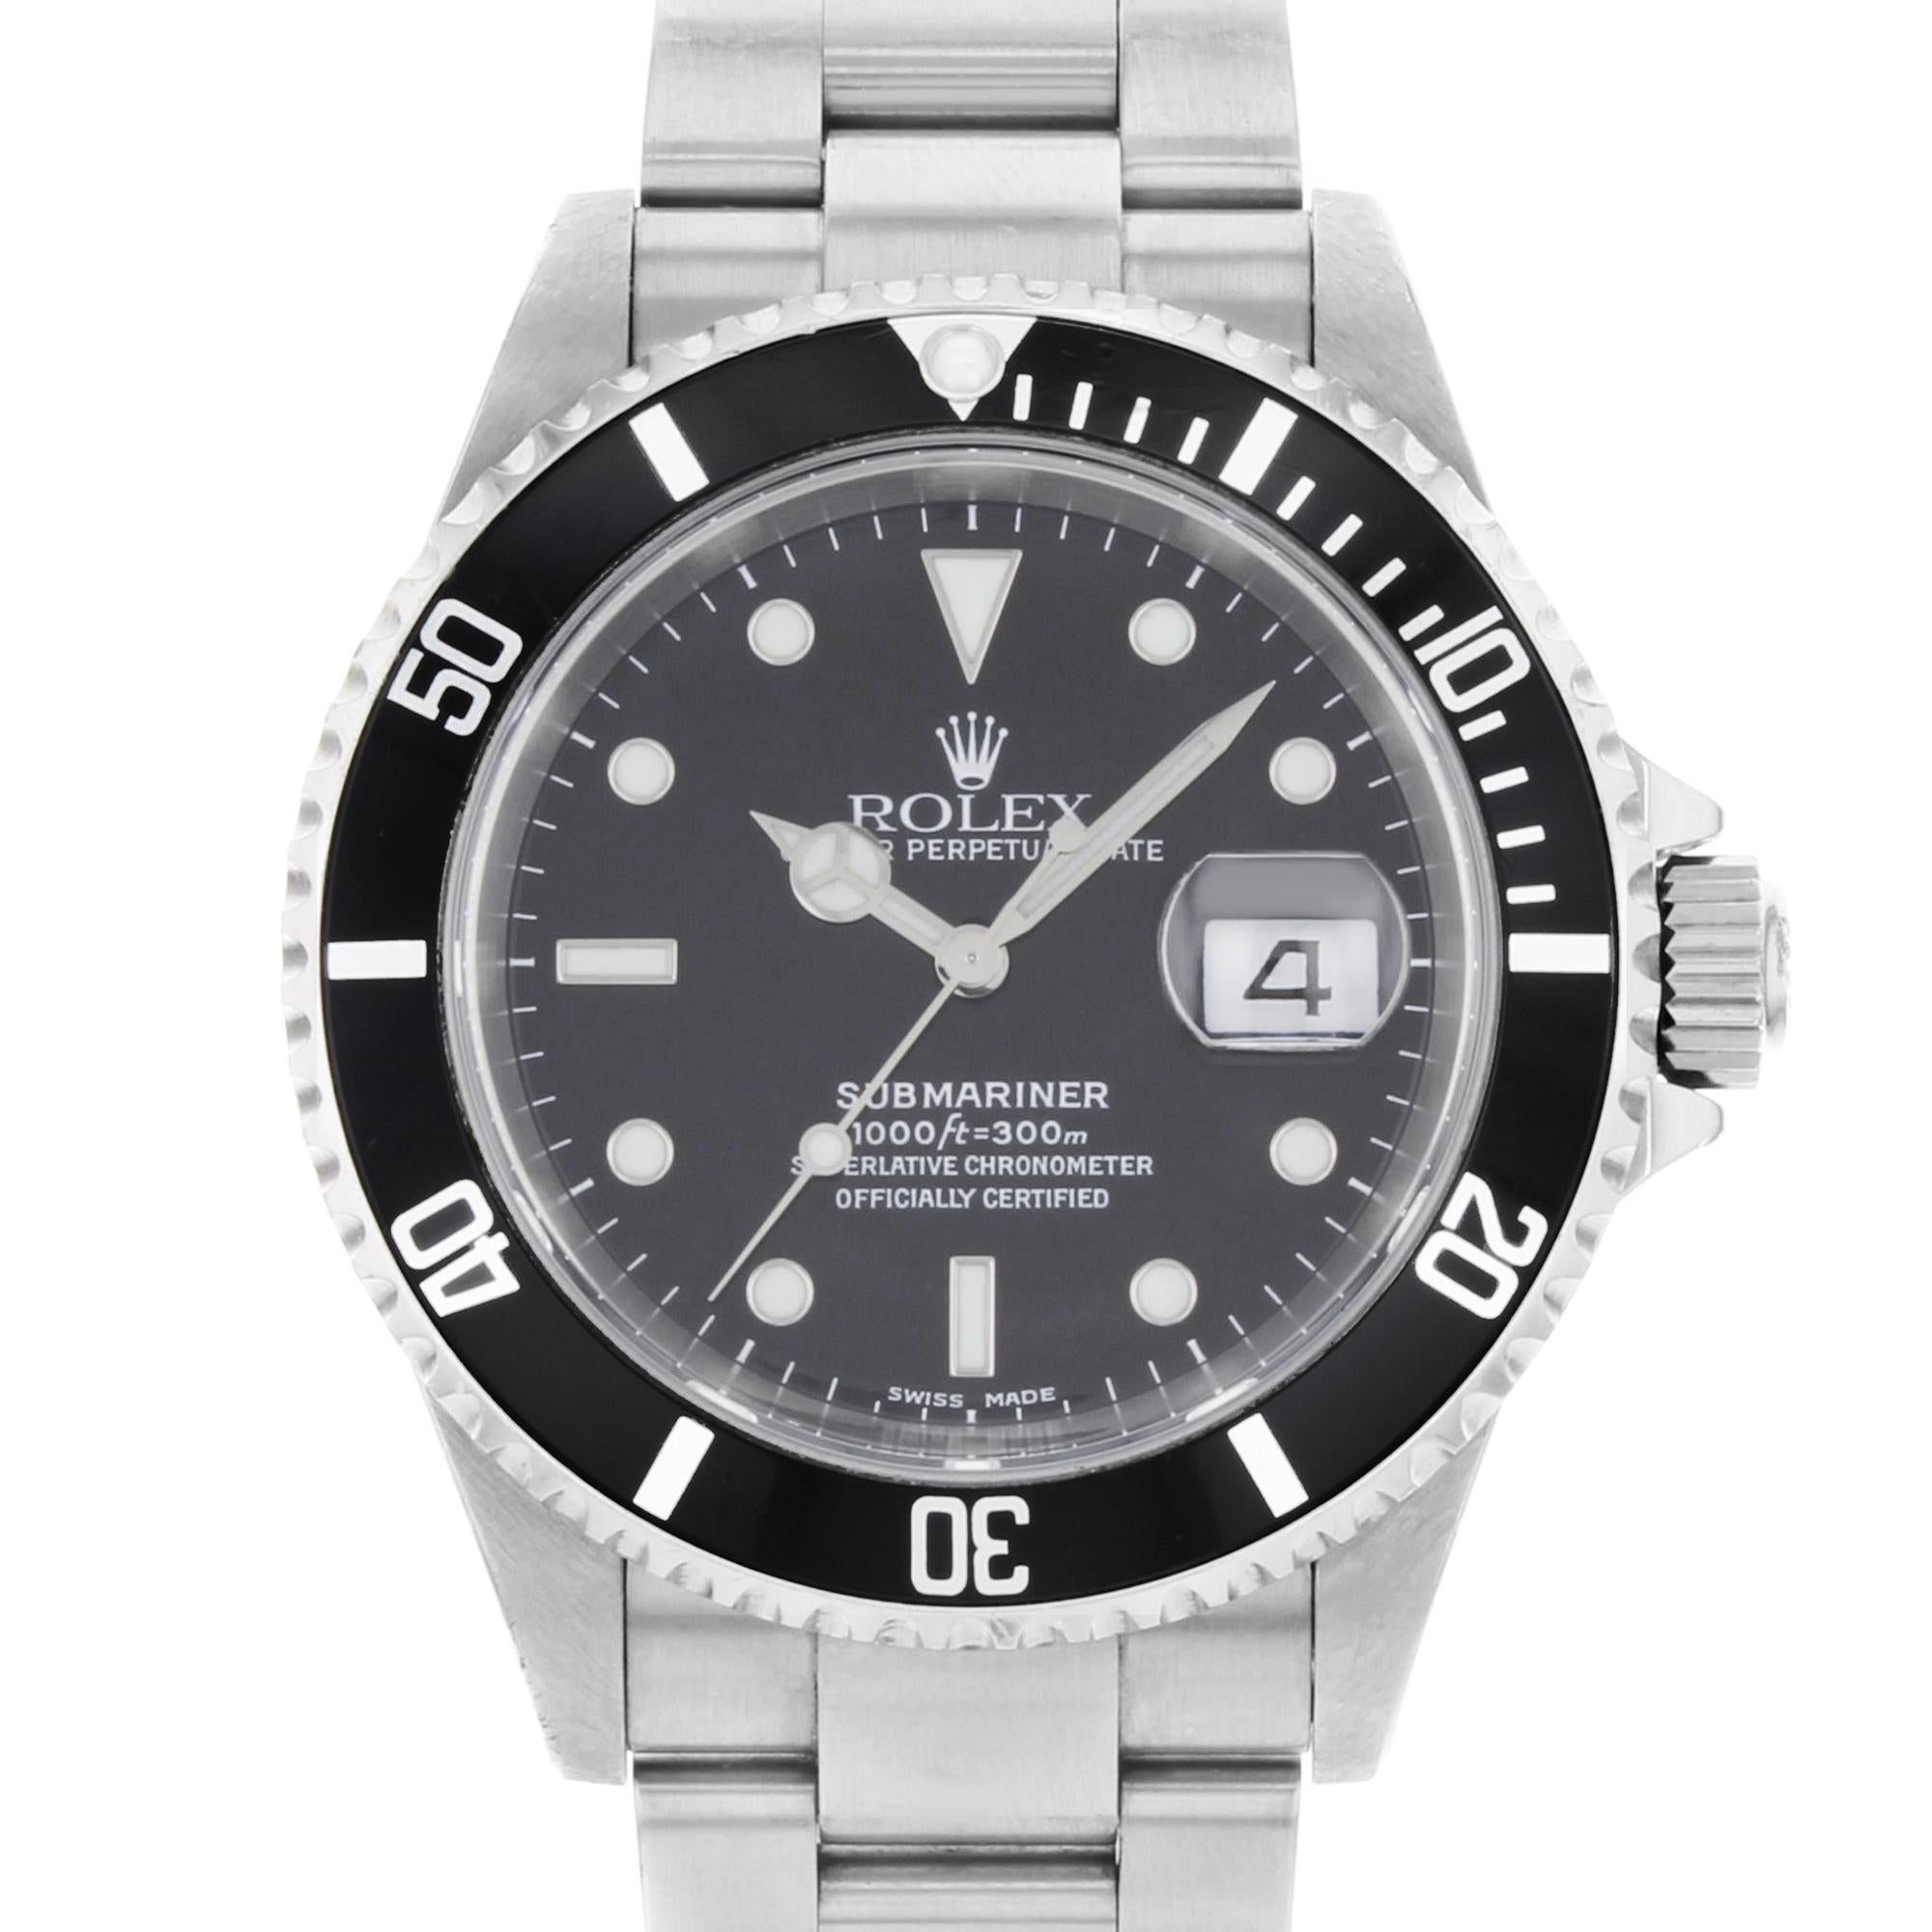 This pre-owned Rolex Submariner  16610  is a beautiful men's timepiece that is powered by an automatic movement which is cased in a stainless steel case. It has a round shape face, date dial and has hand sticks & dots style markers. It is completed